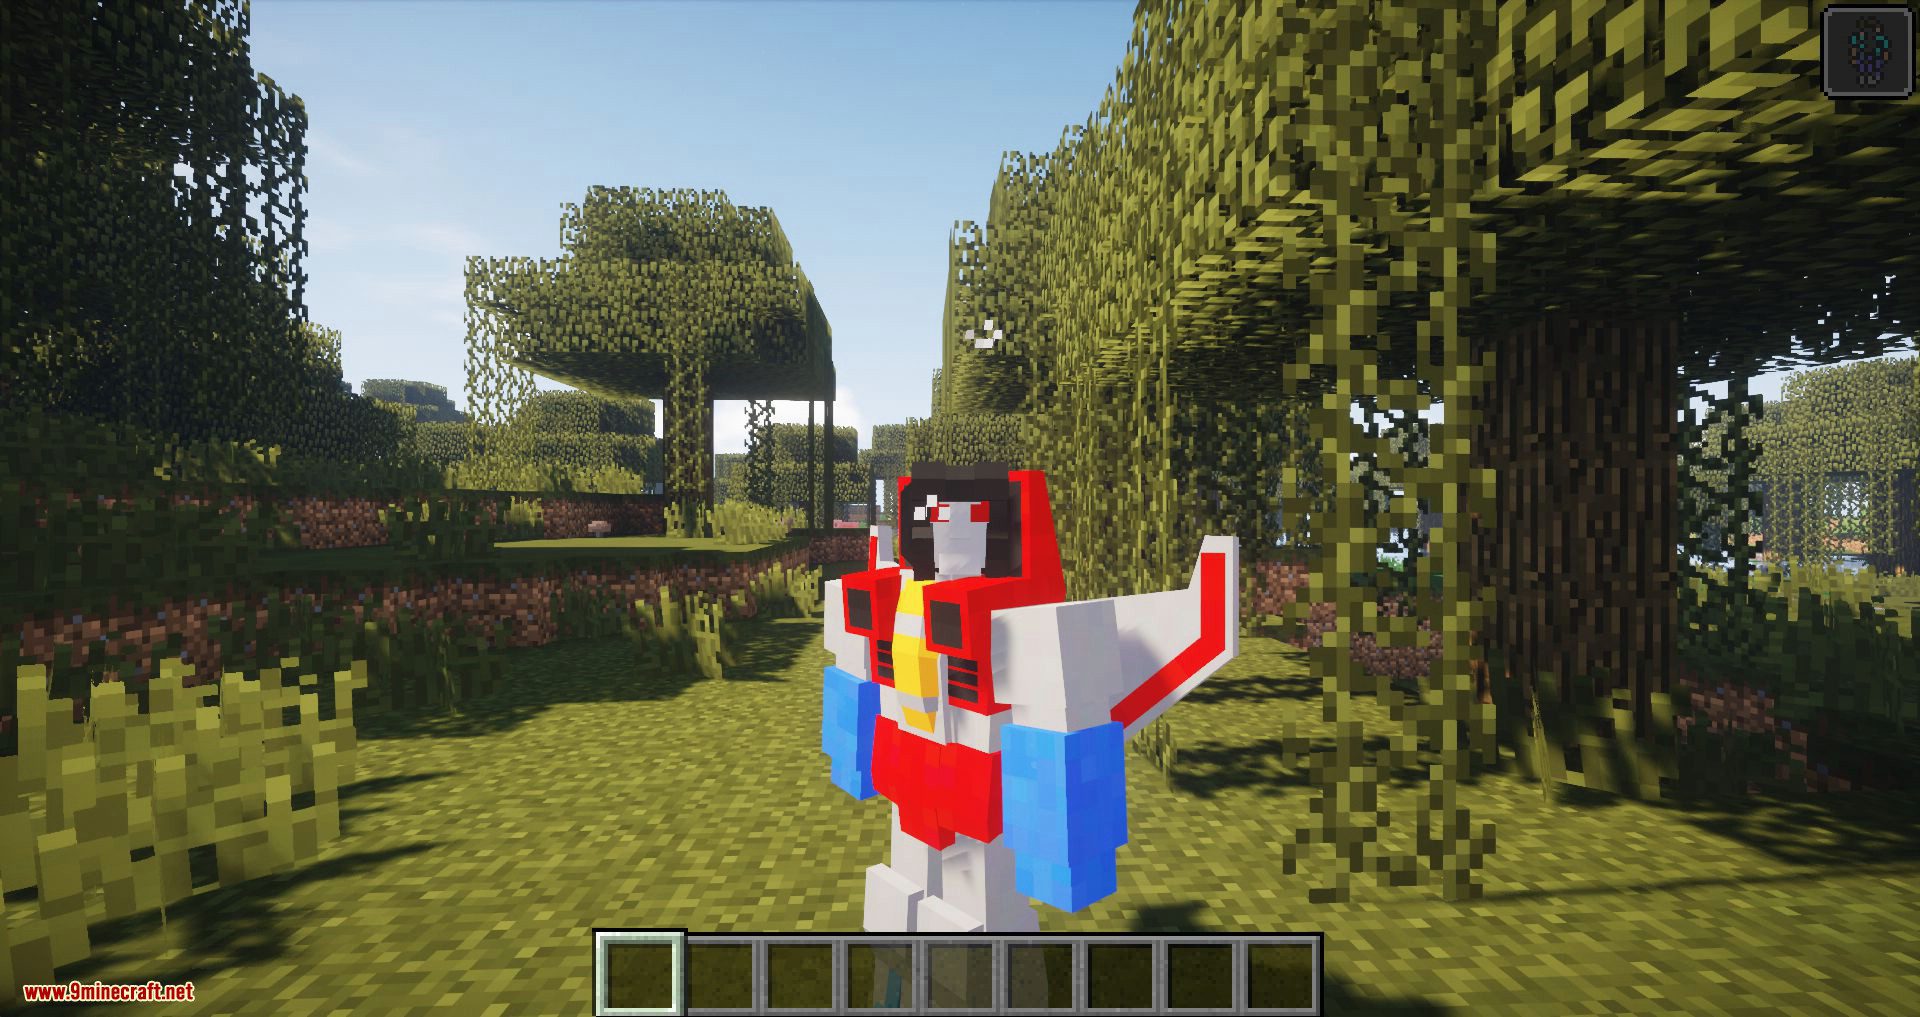 Transformers Unlimited Mod 1.12.2 (Transform Your Minecraft Experience) 5